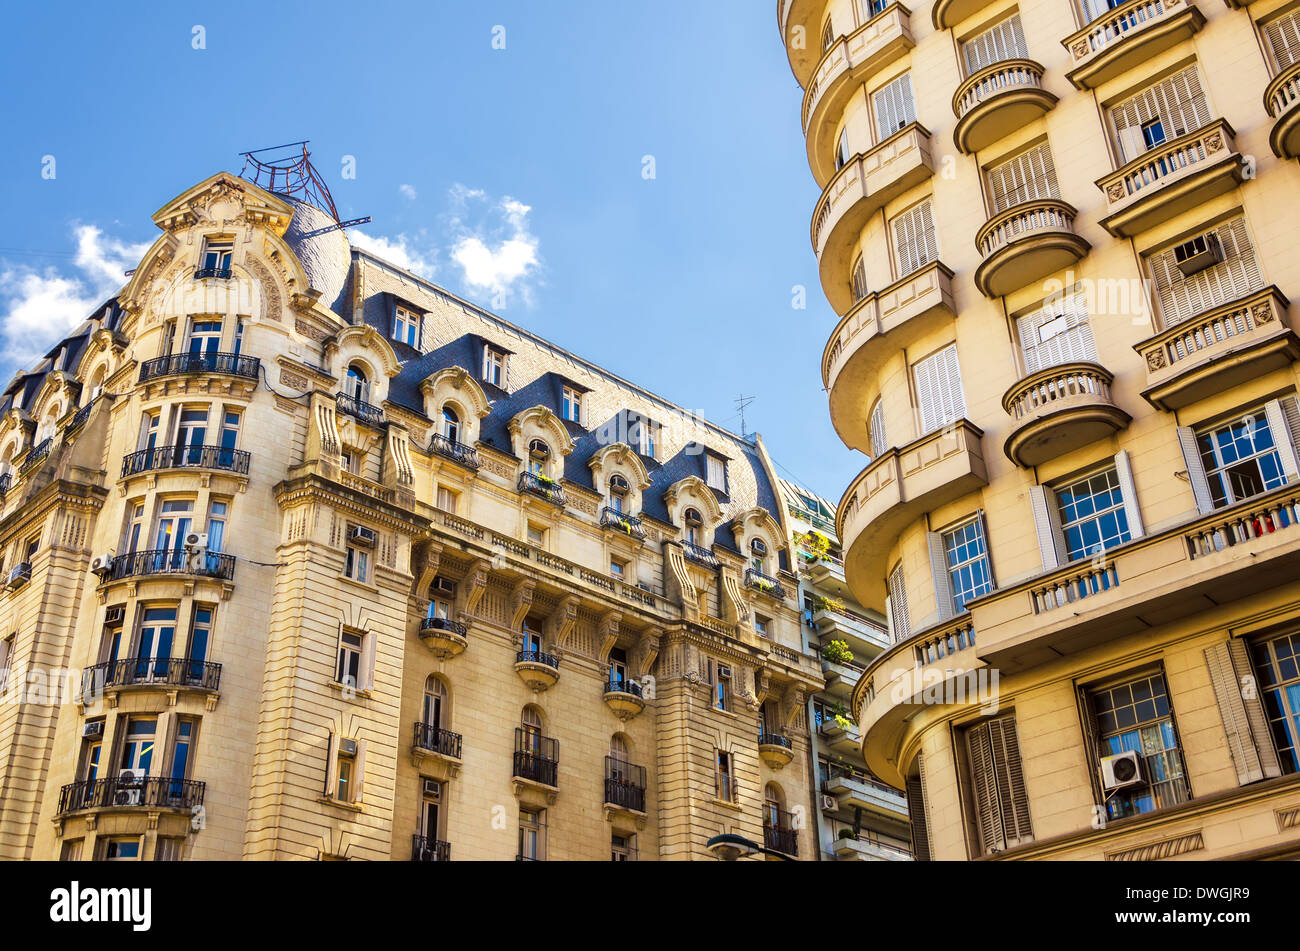 Beautiful French style architecture in the Recoleta neighborhood of Buenos Aires, Argentina Stock Photo